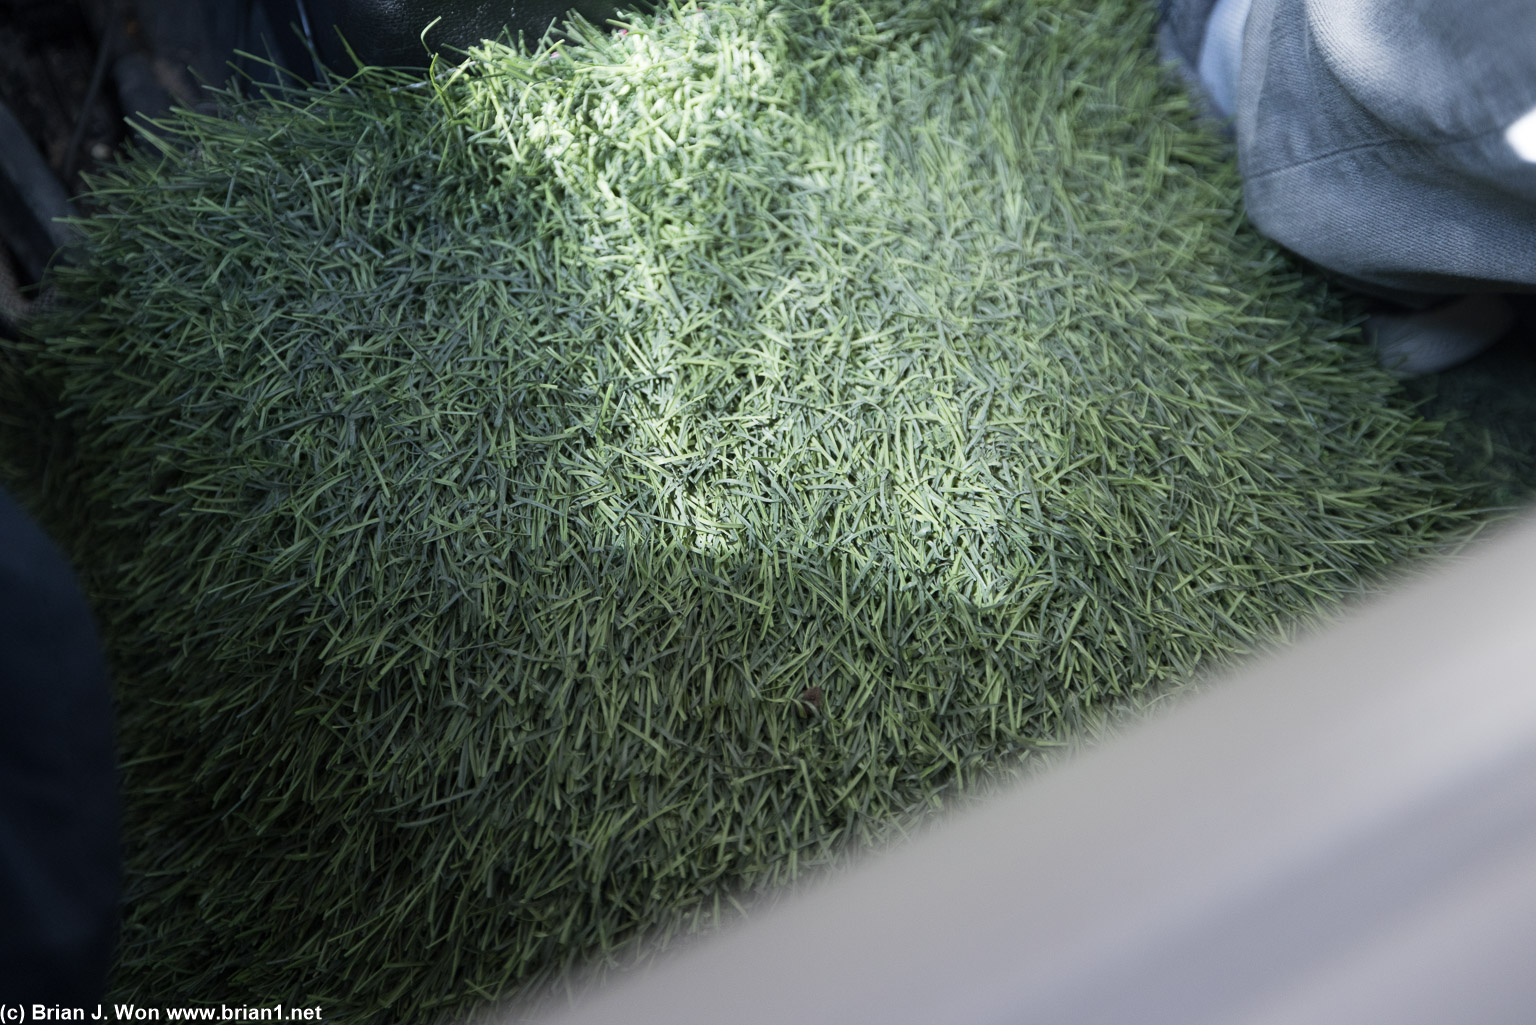 Fake grass for a floor mat in this taxi?